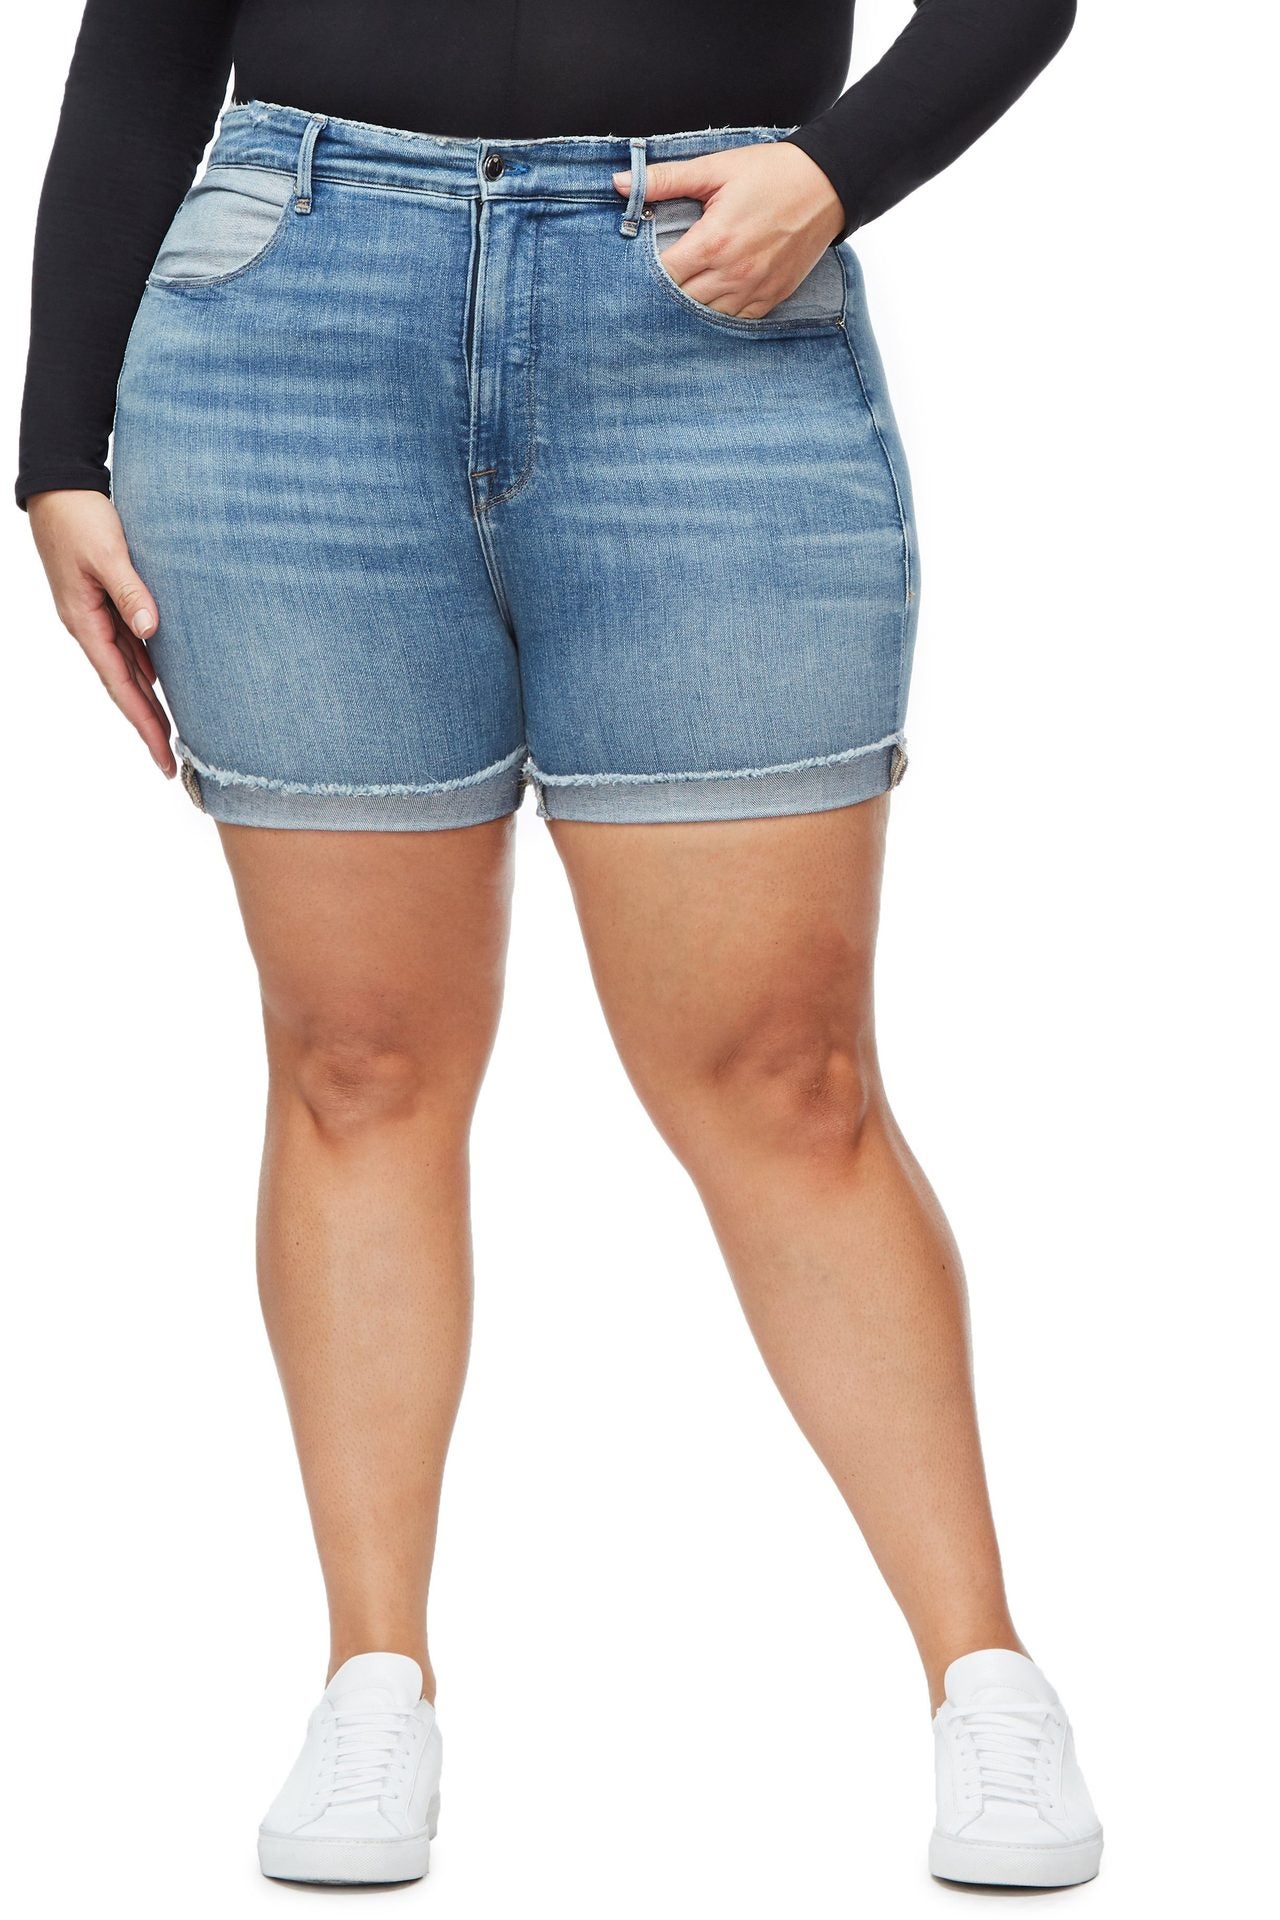 Oh Hey, Curvy Girl! These Denim Cut Offs Are Exactly What You Need For Sweltering Hot Days